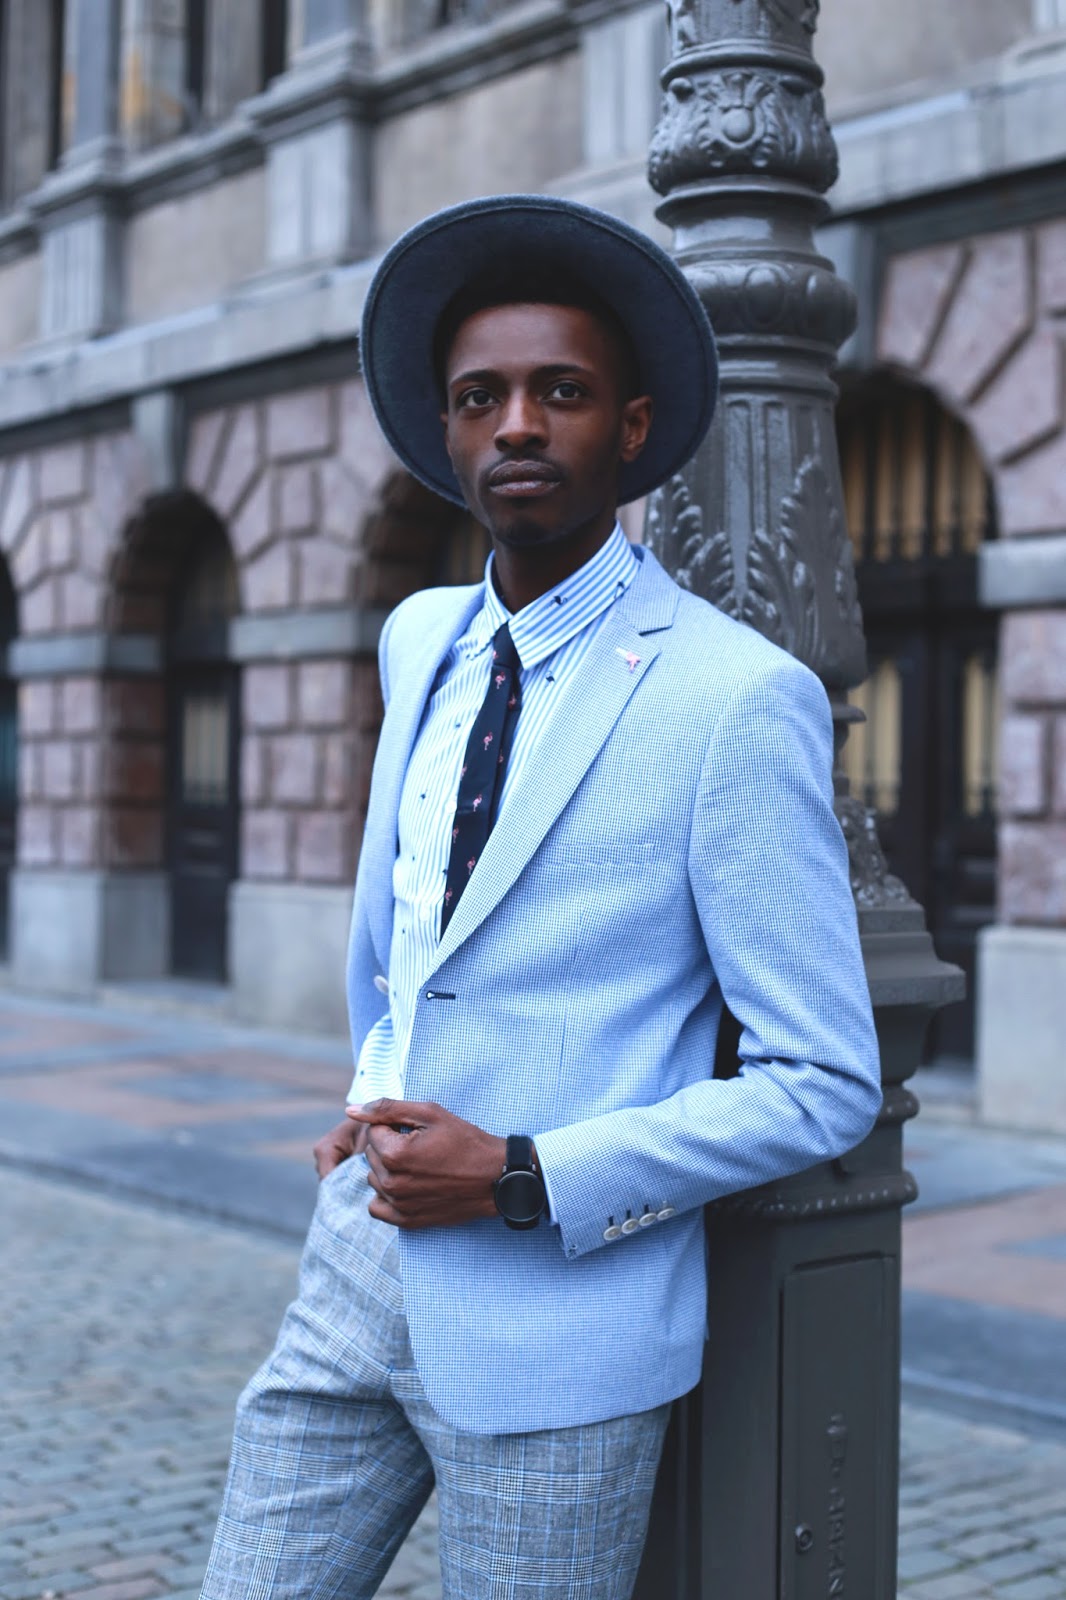 Business Chic men's look we fashion + adidas nmd sneakers // suits and sneakers - street style antwerp by jonthegold - photo by sofia dossantos